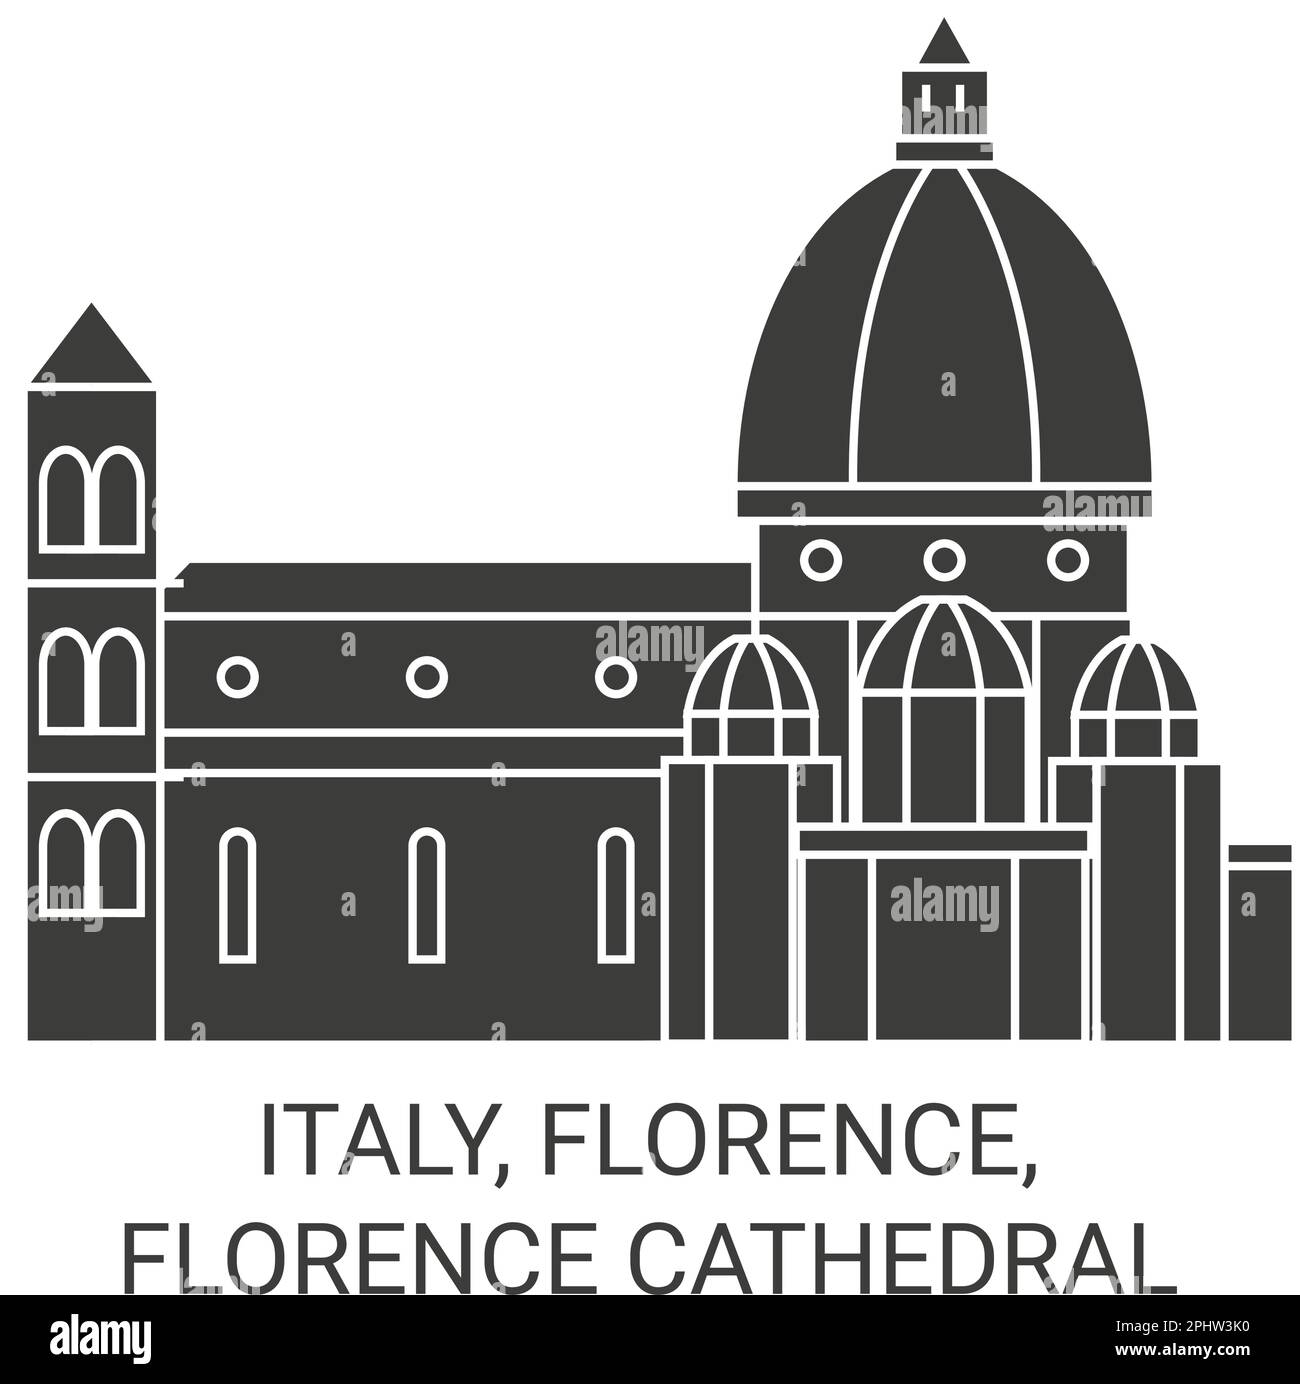 Italy, Florence, Florence Cathedral travel landmark vector illustration Stock Vector